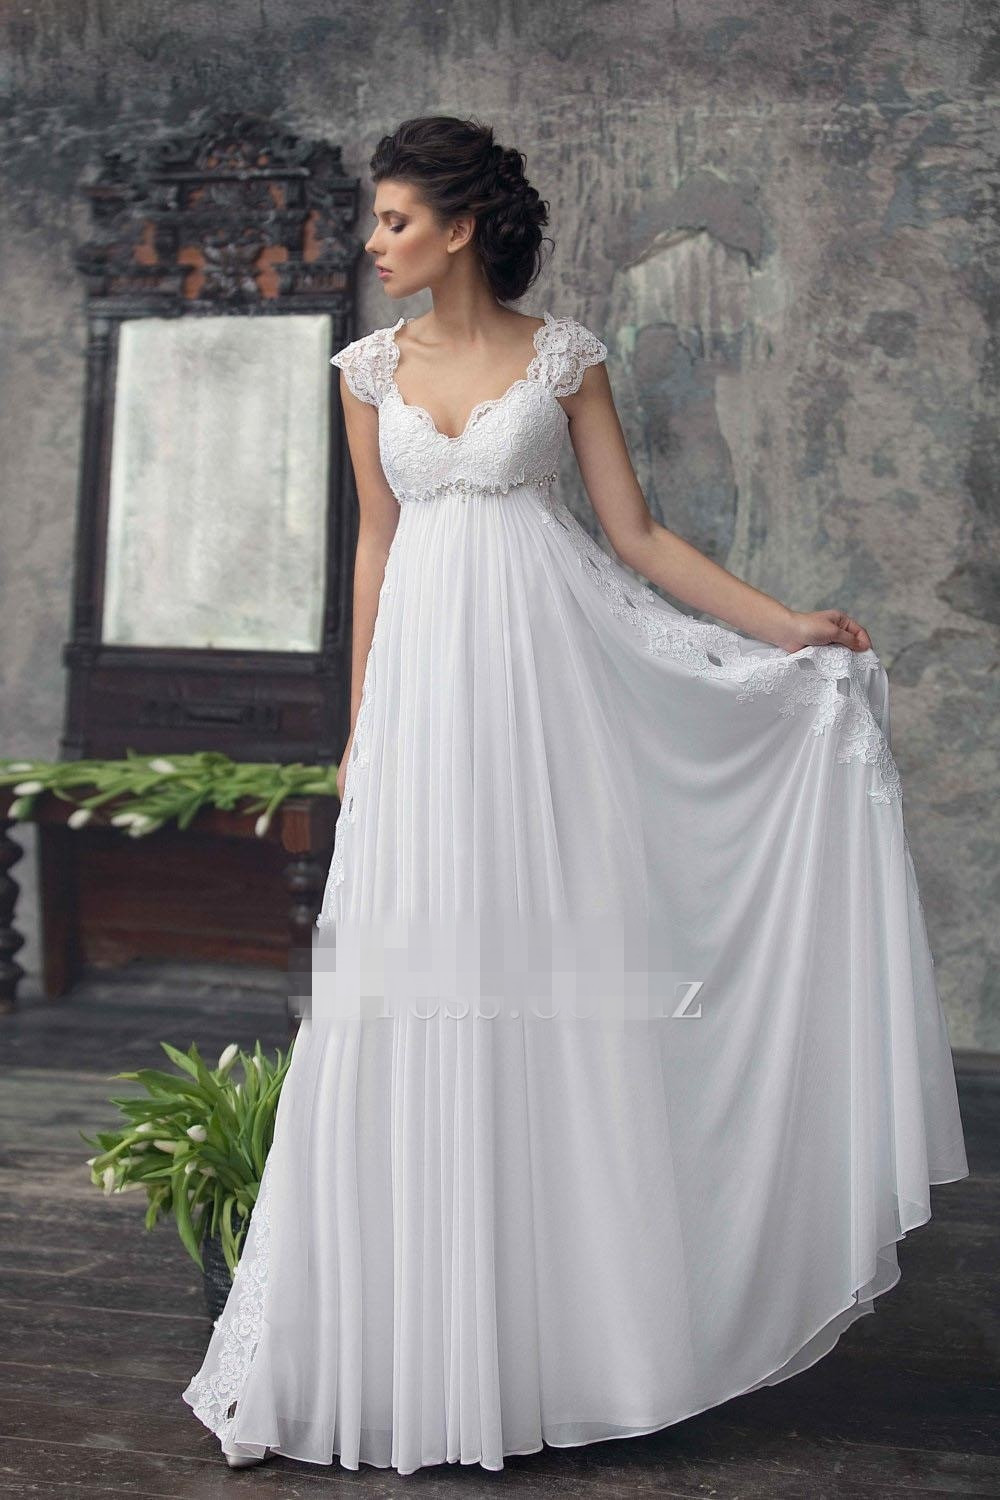 Wedding Gowns Lace
 2017 Empire Maternity Wedding Dresses Beaded Lace Chiffon